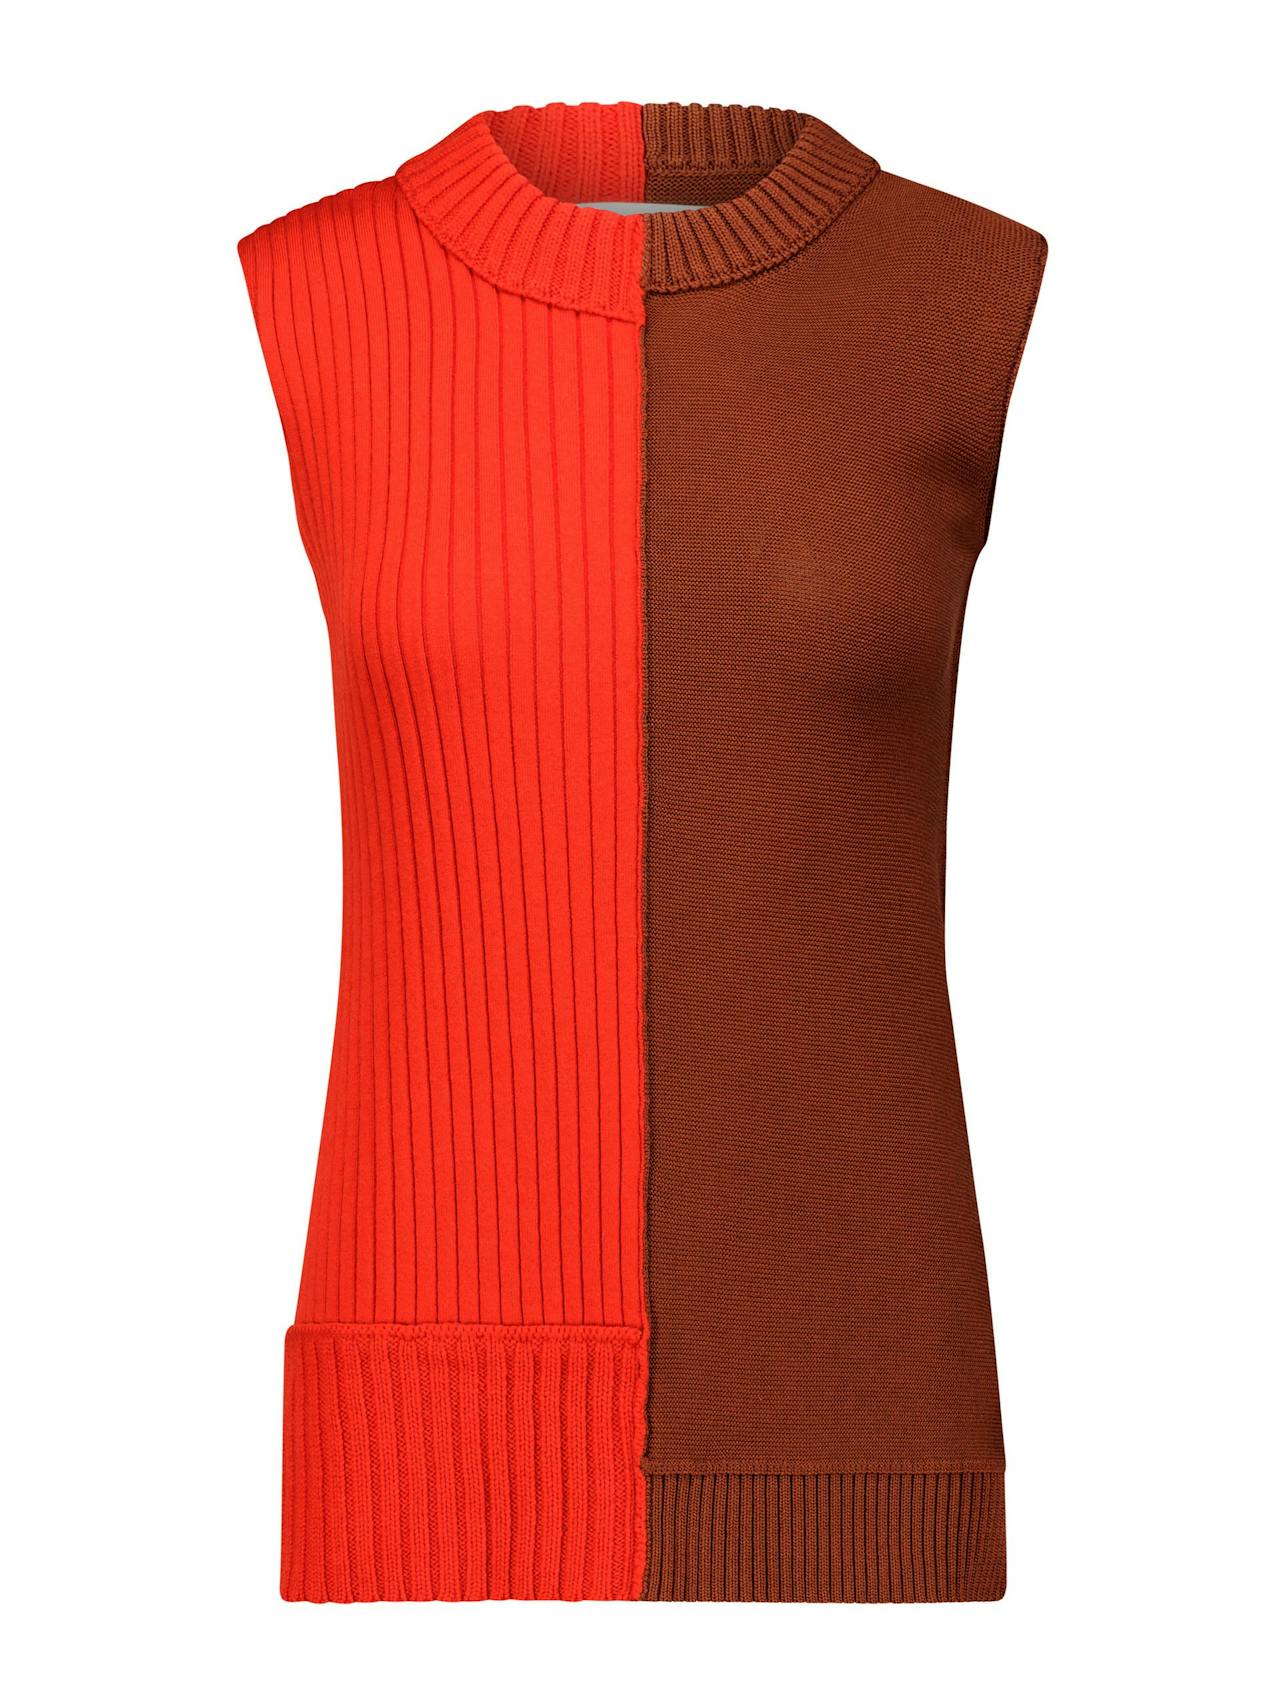 Poppy and brown patchwork sleeveless pullover